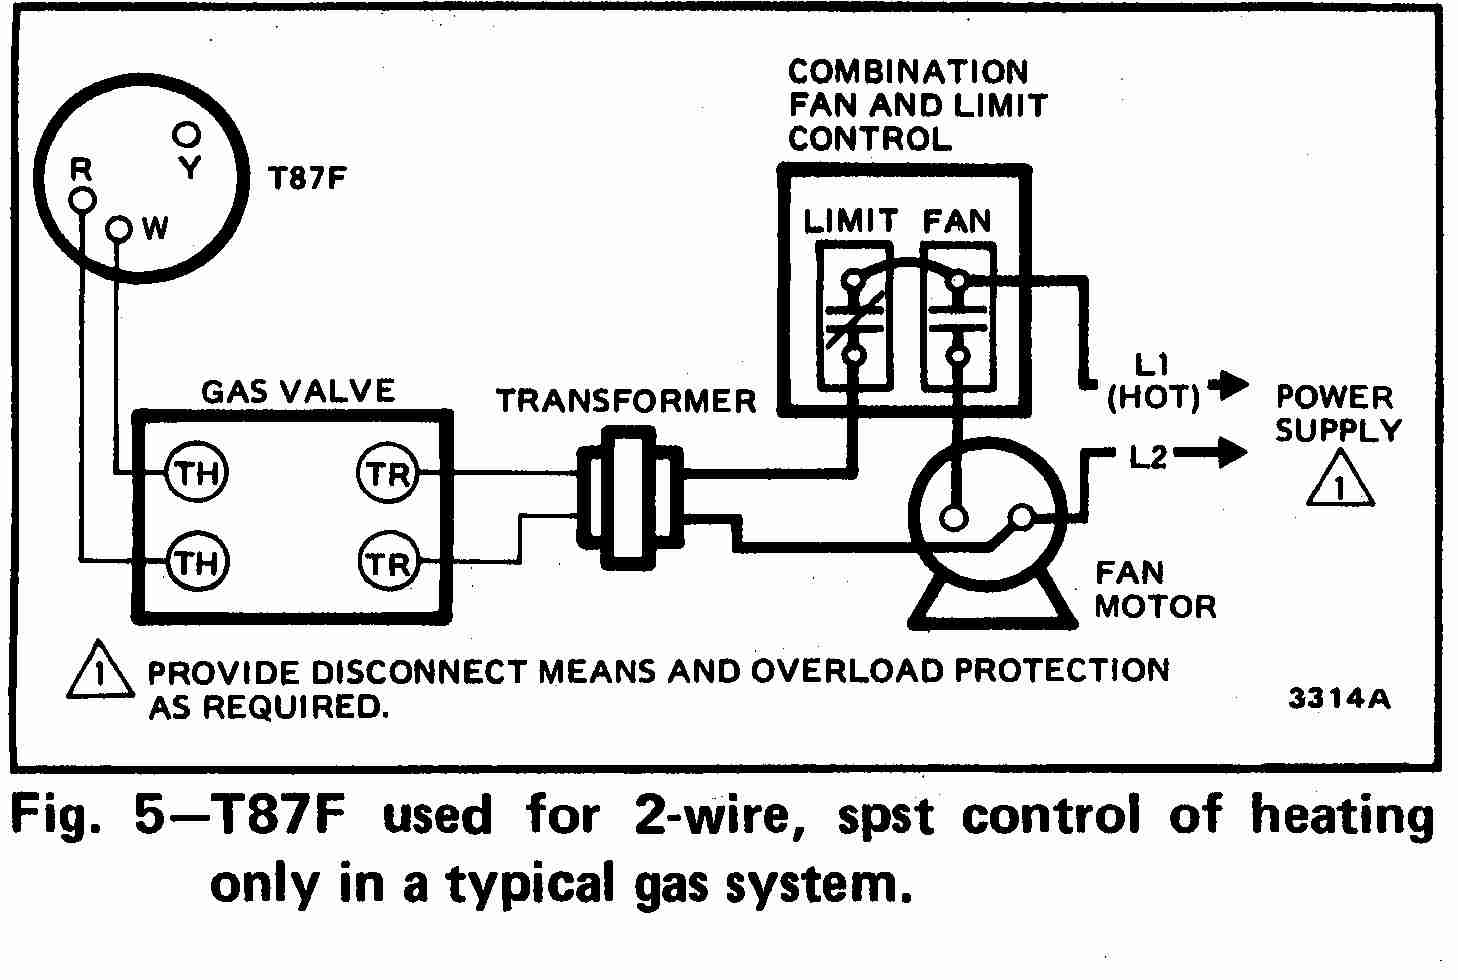 Room Thermostat Wiring Diagrams For Hvac Systems - Hvac Thermostat Wiring Diagram